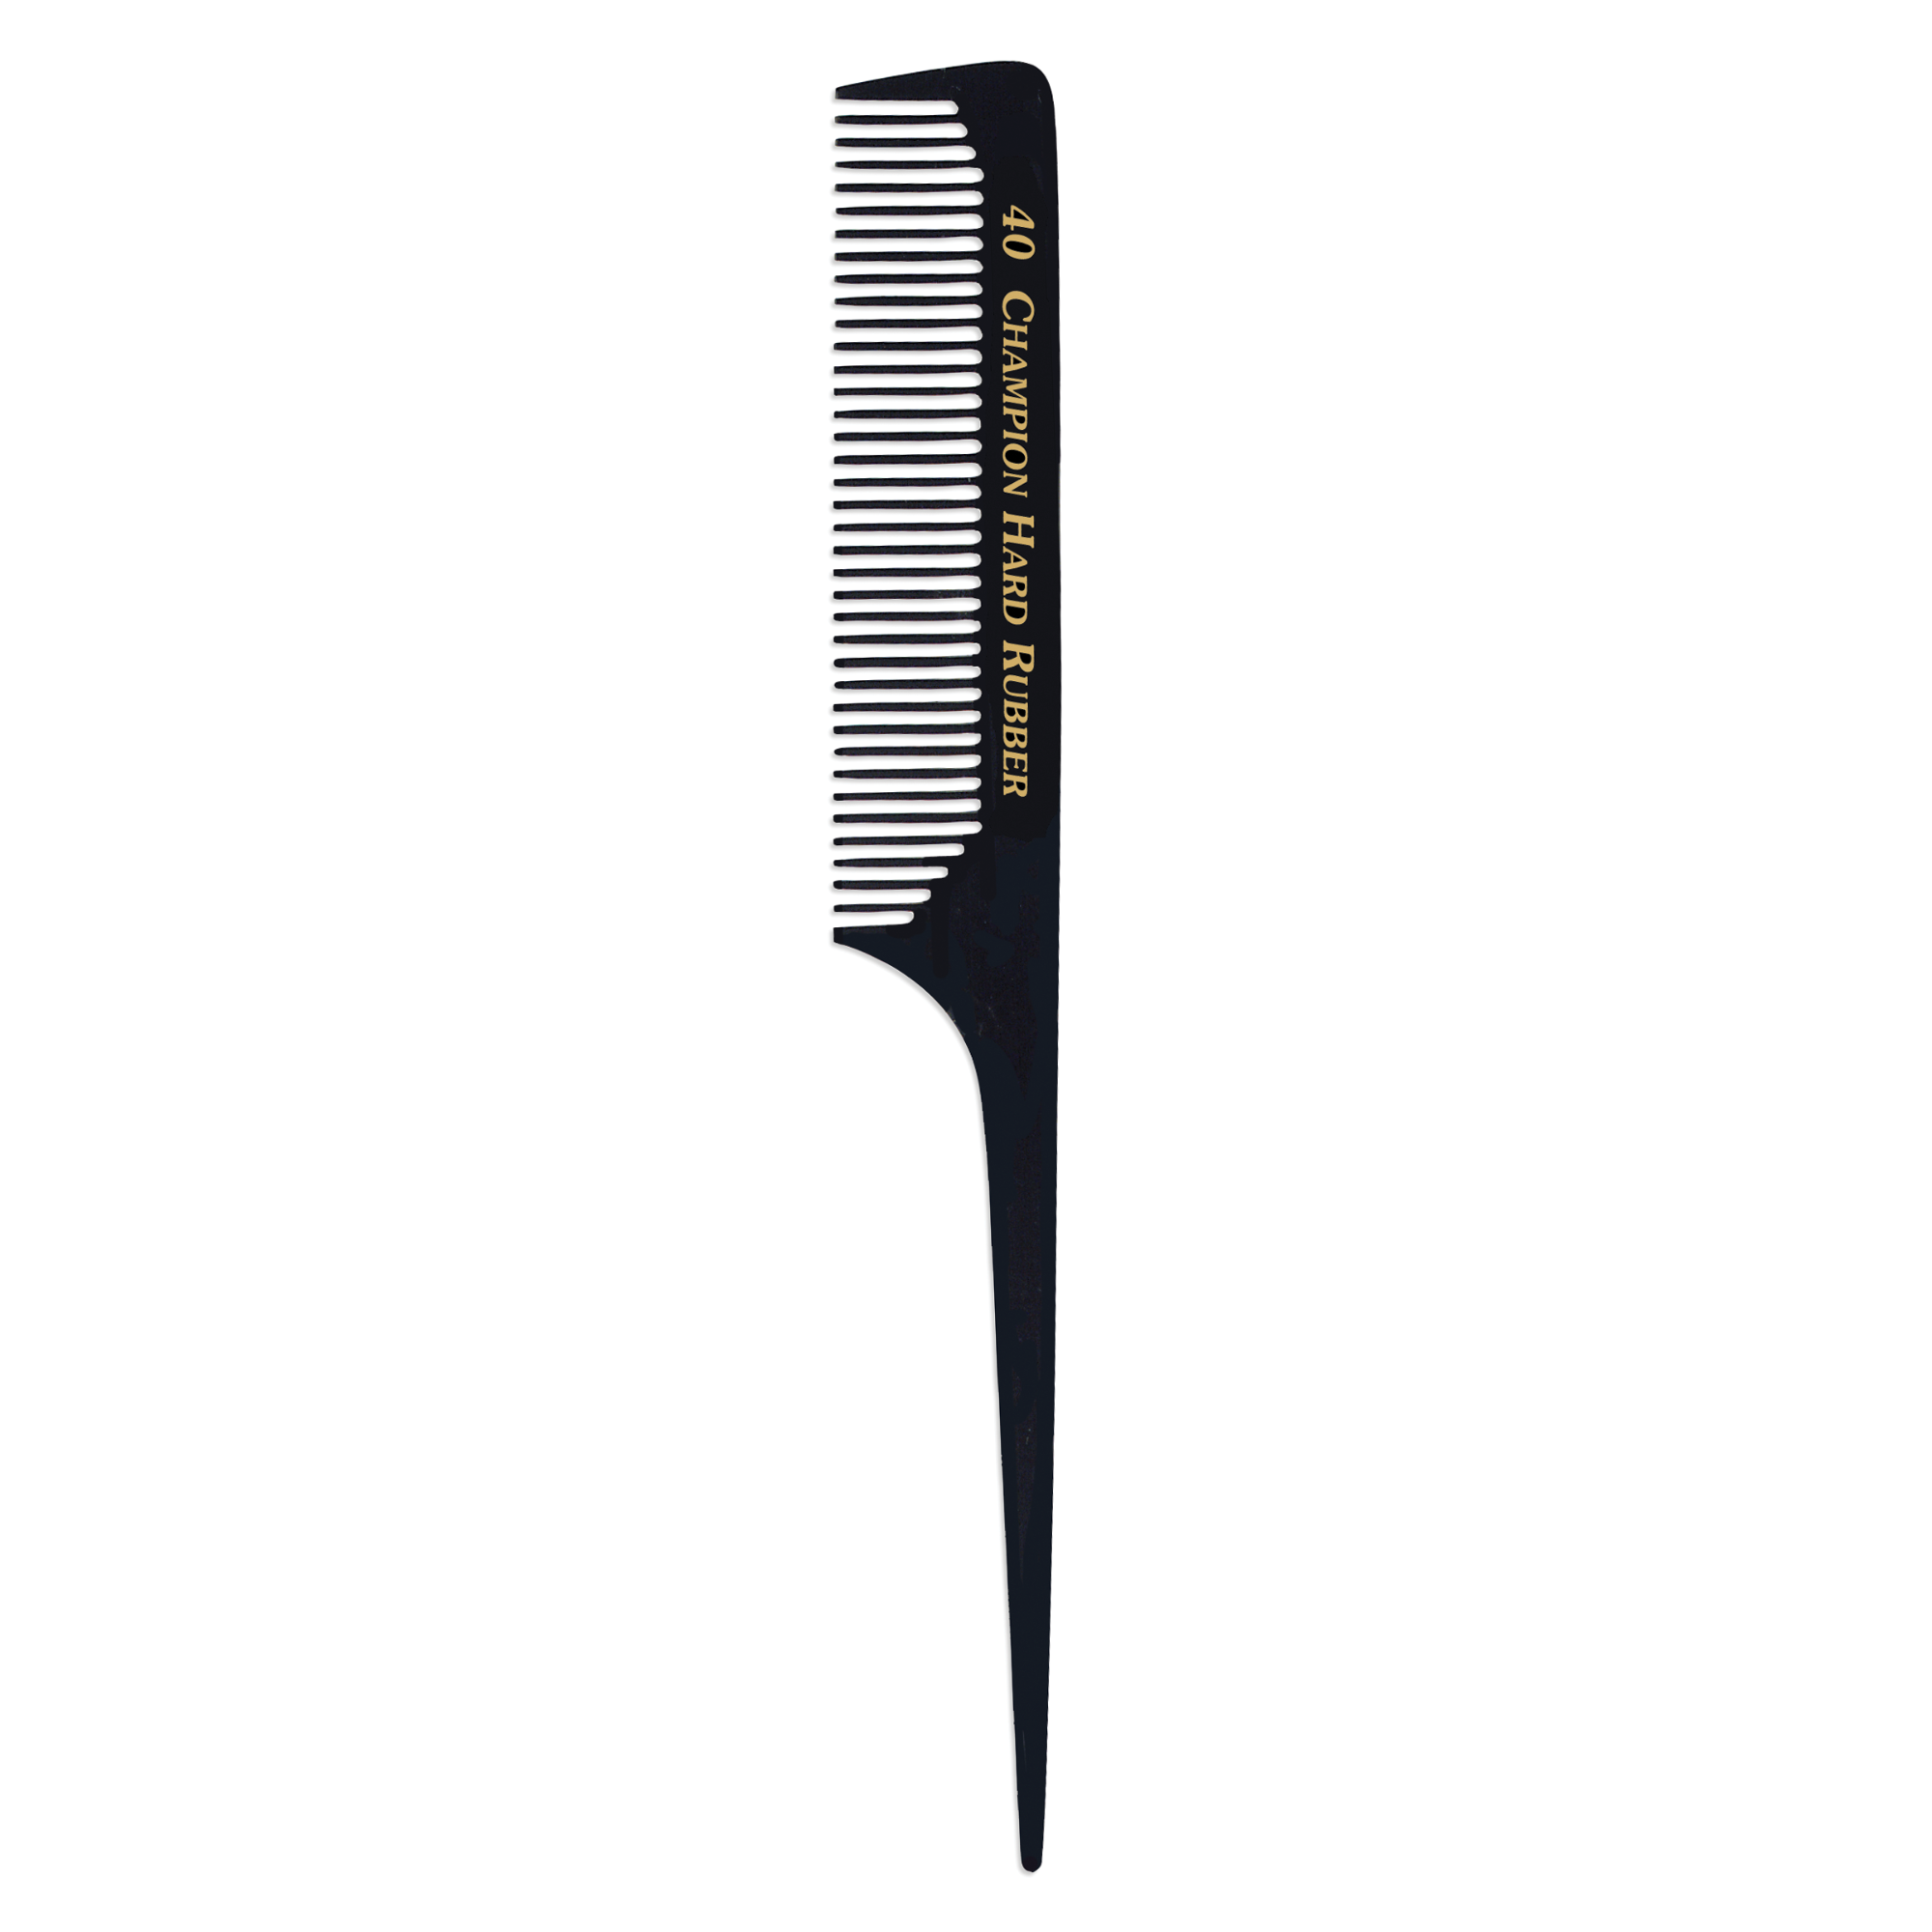 Hard Rubber Rat Tail Comb, Wide Teeth - 8"